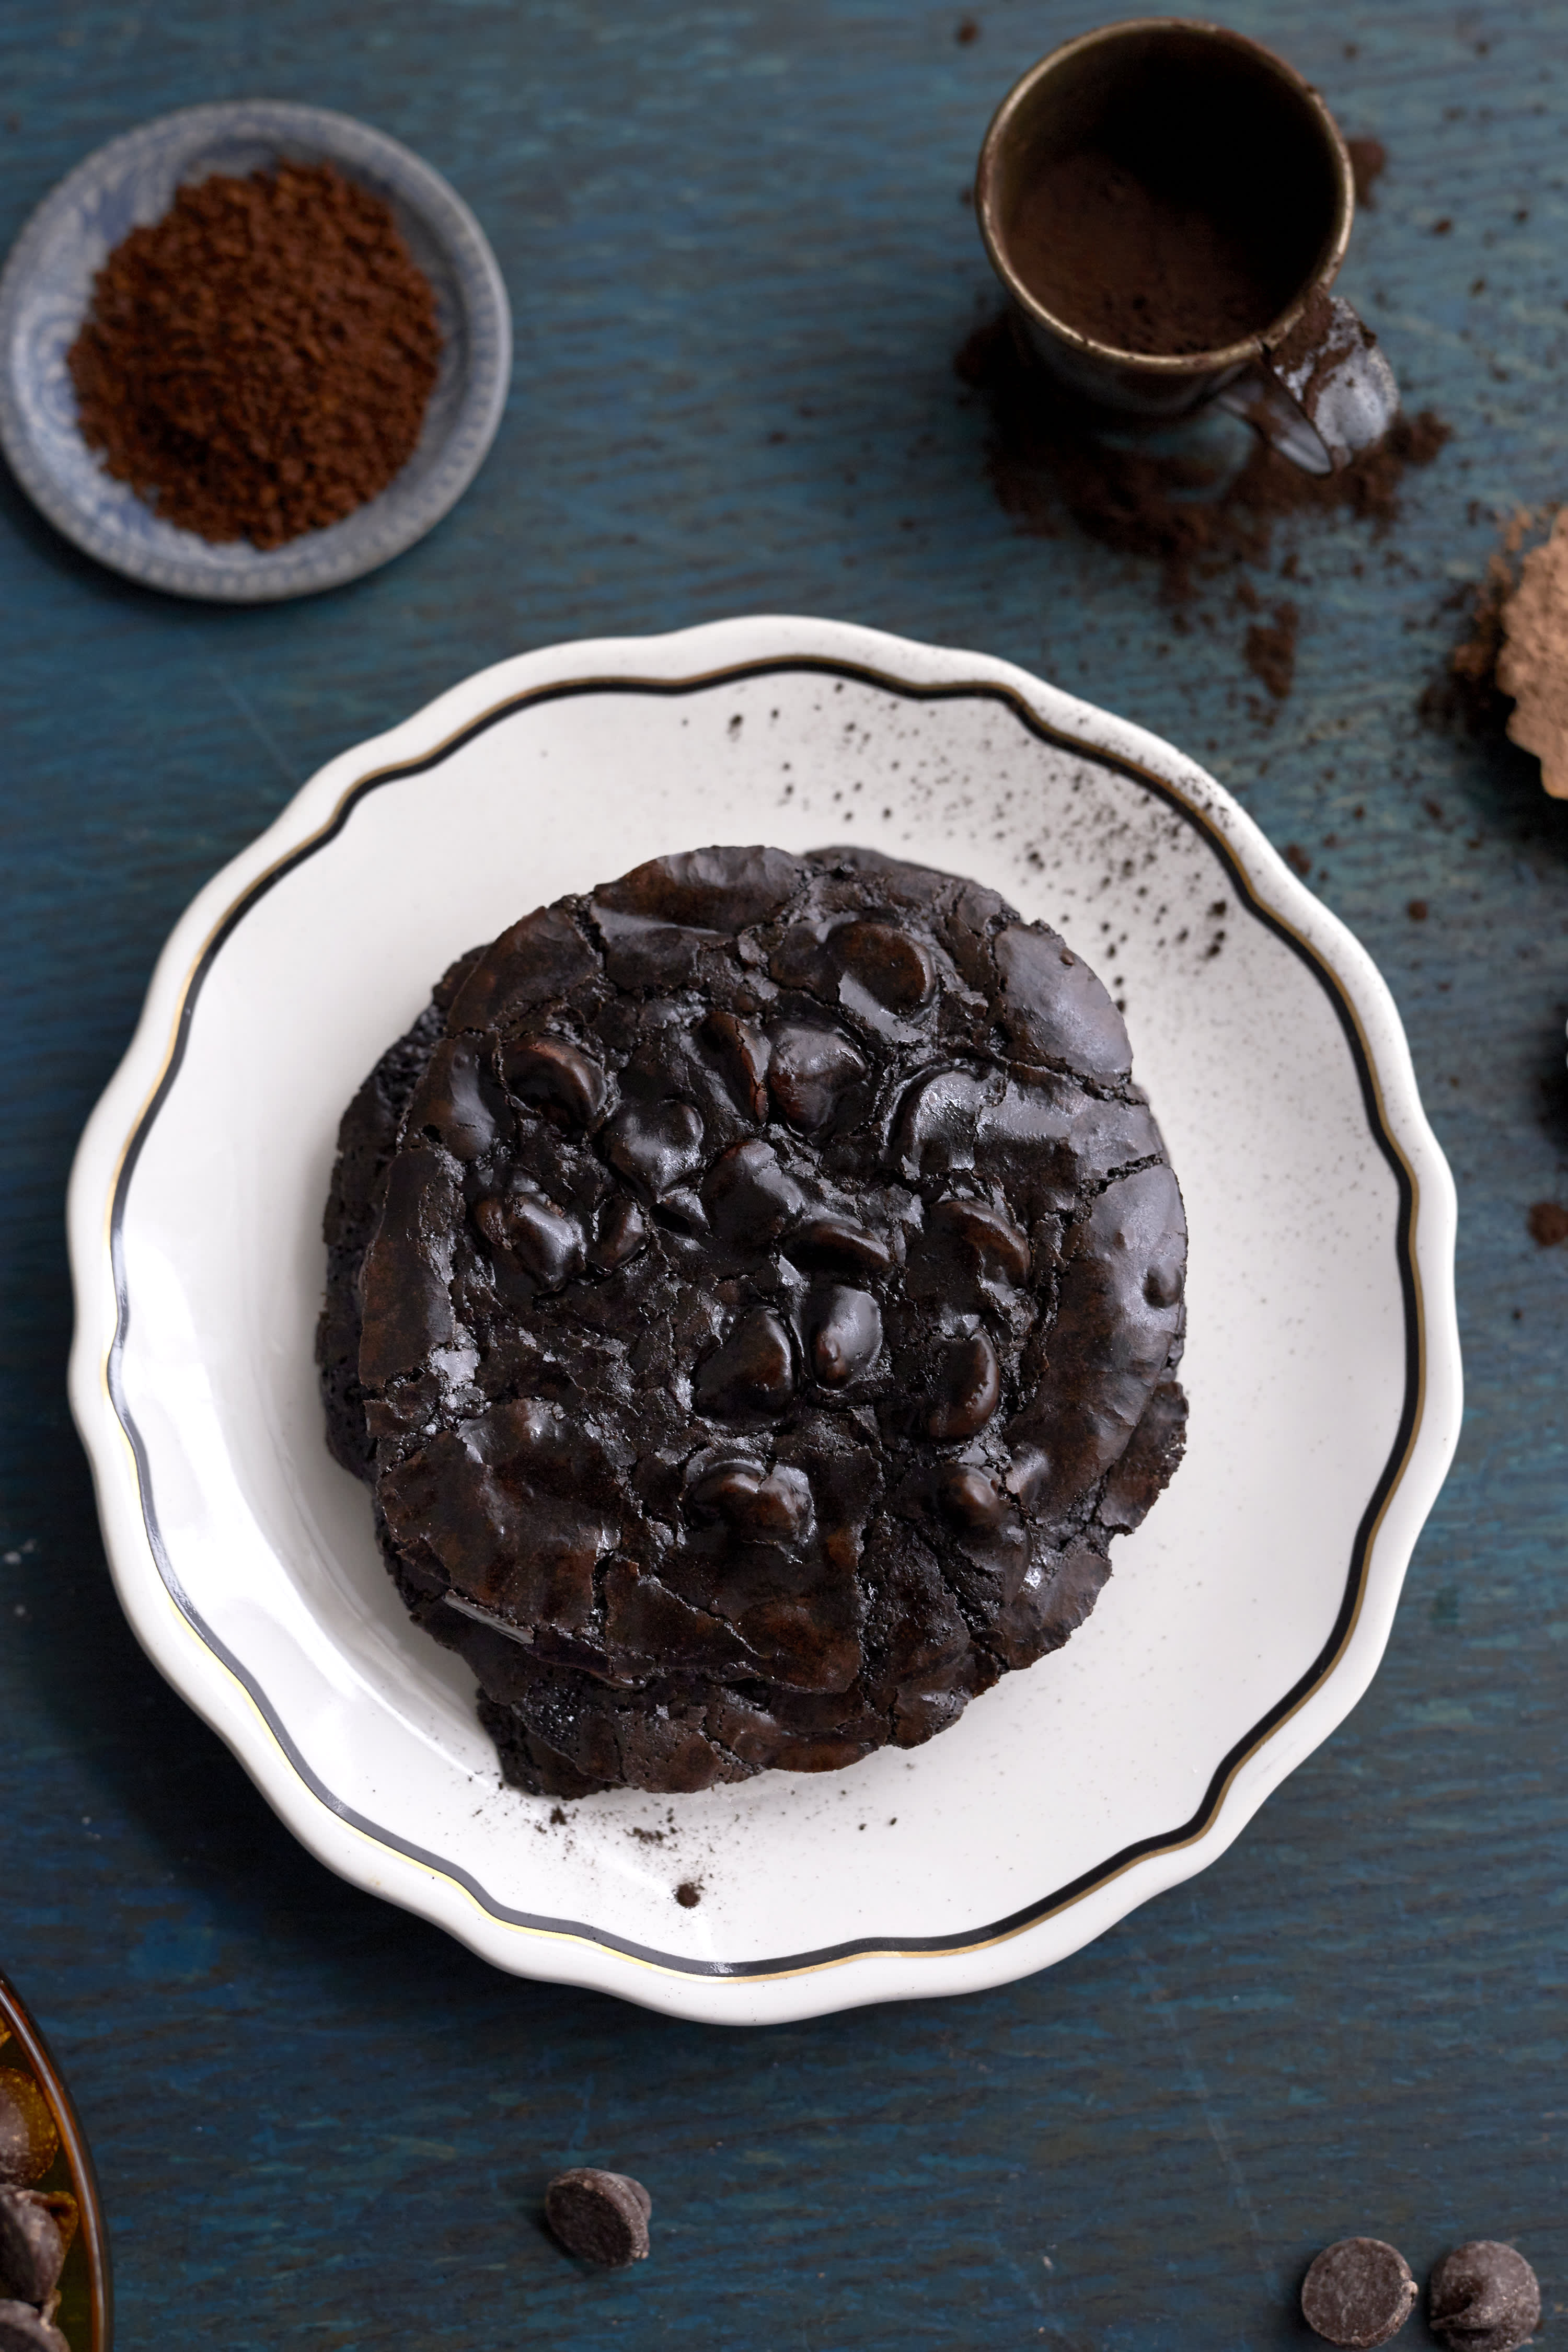 How to Bake With Black Cocoa Powder